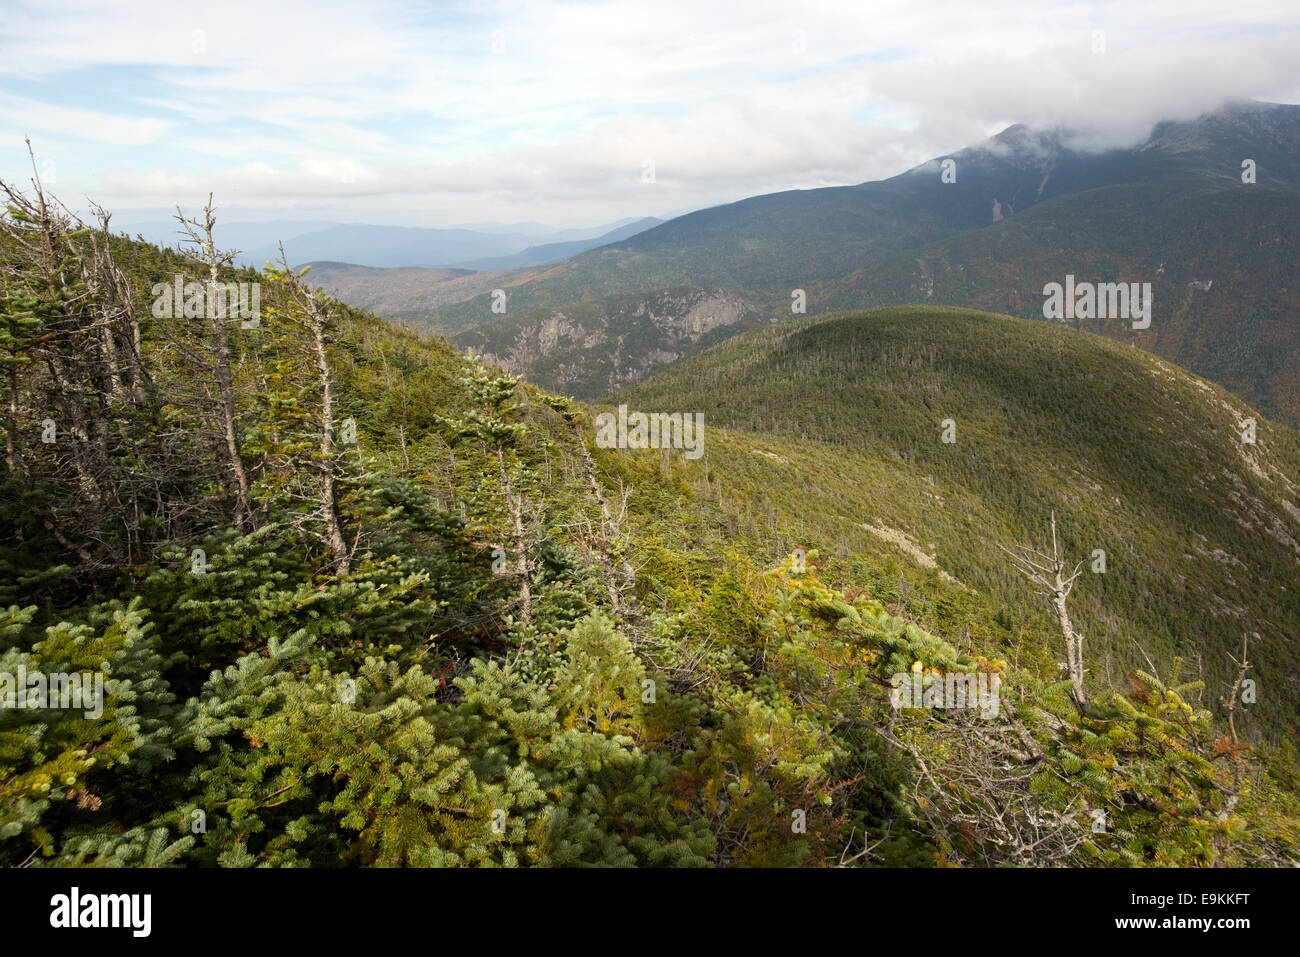 Vista panoramica dal Monte cannone, White Mountain National Forest, New Hampshire USA Foto Stock